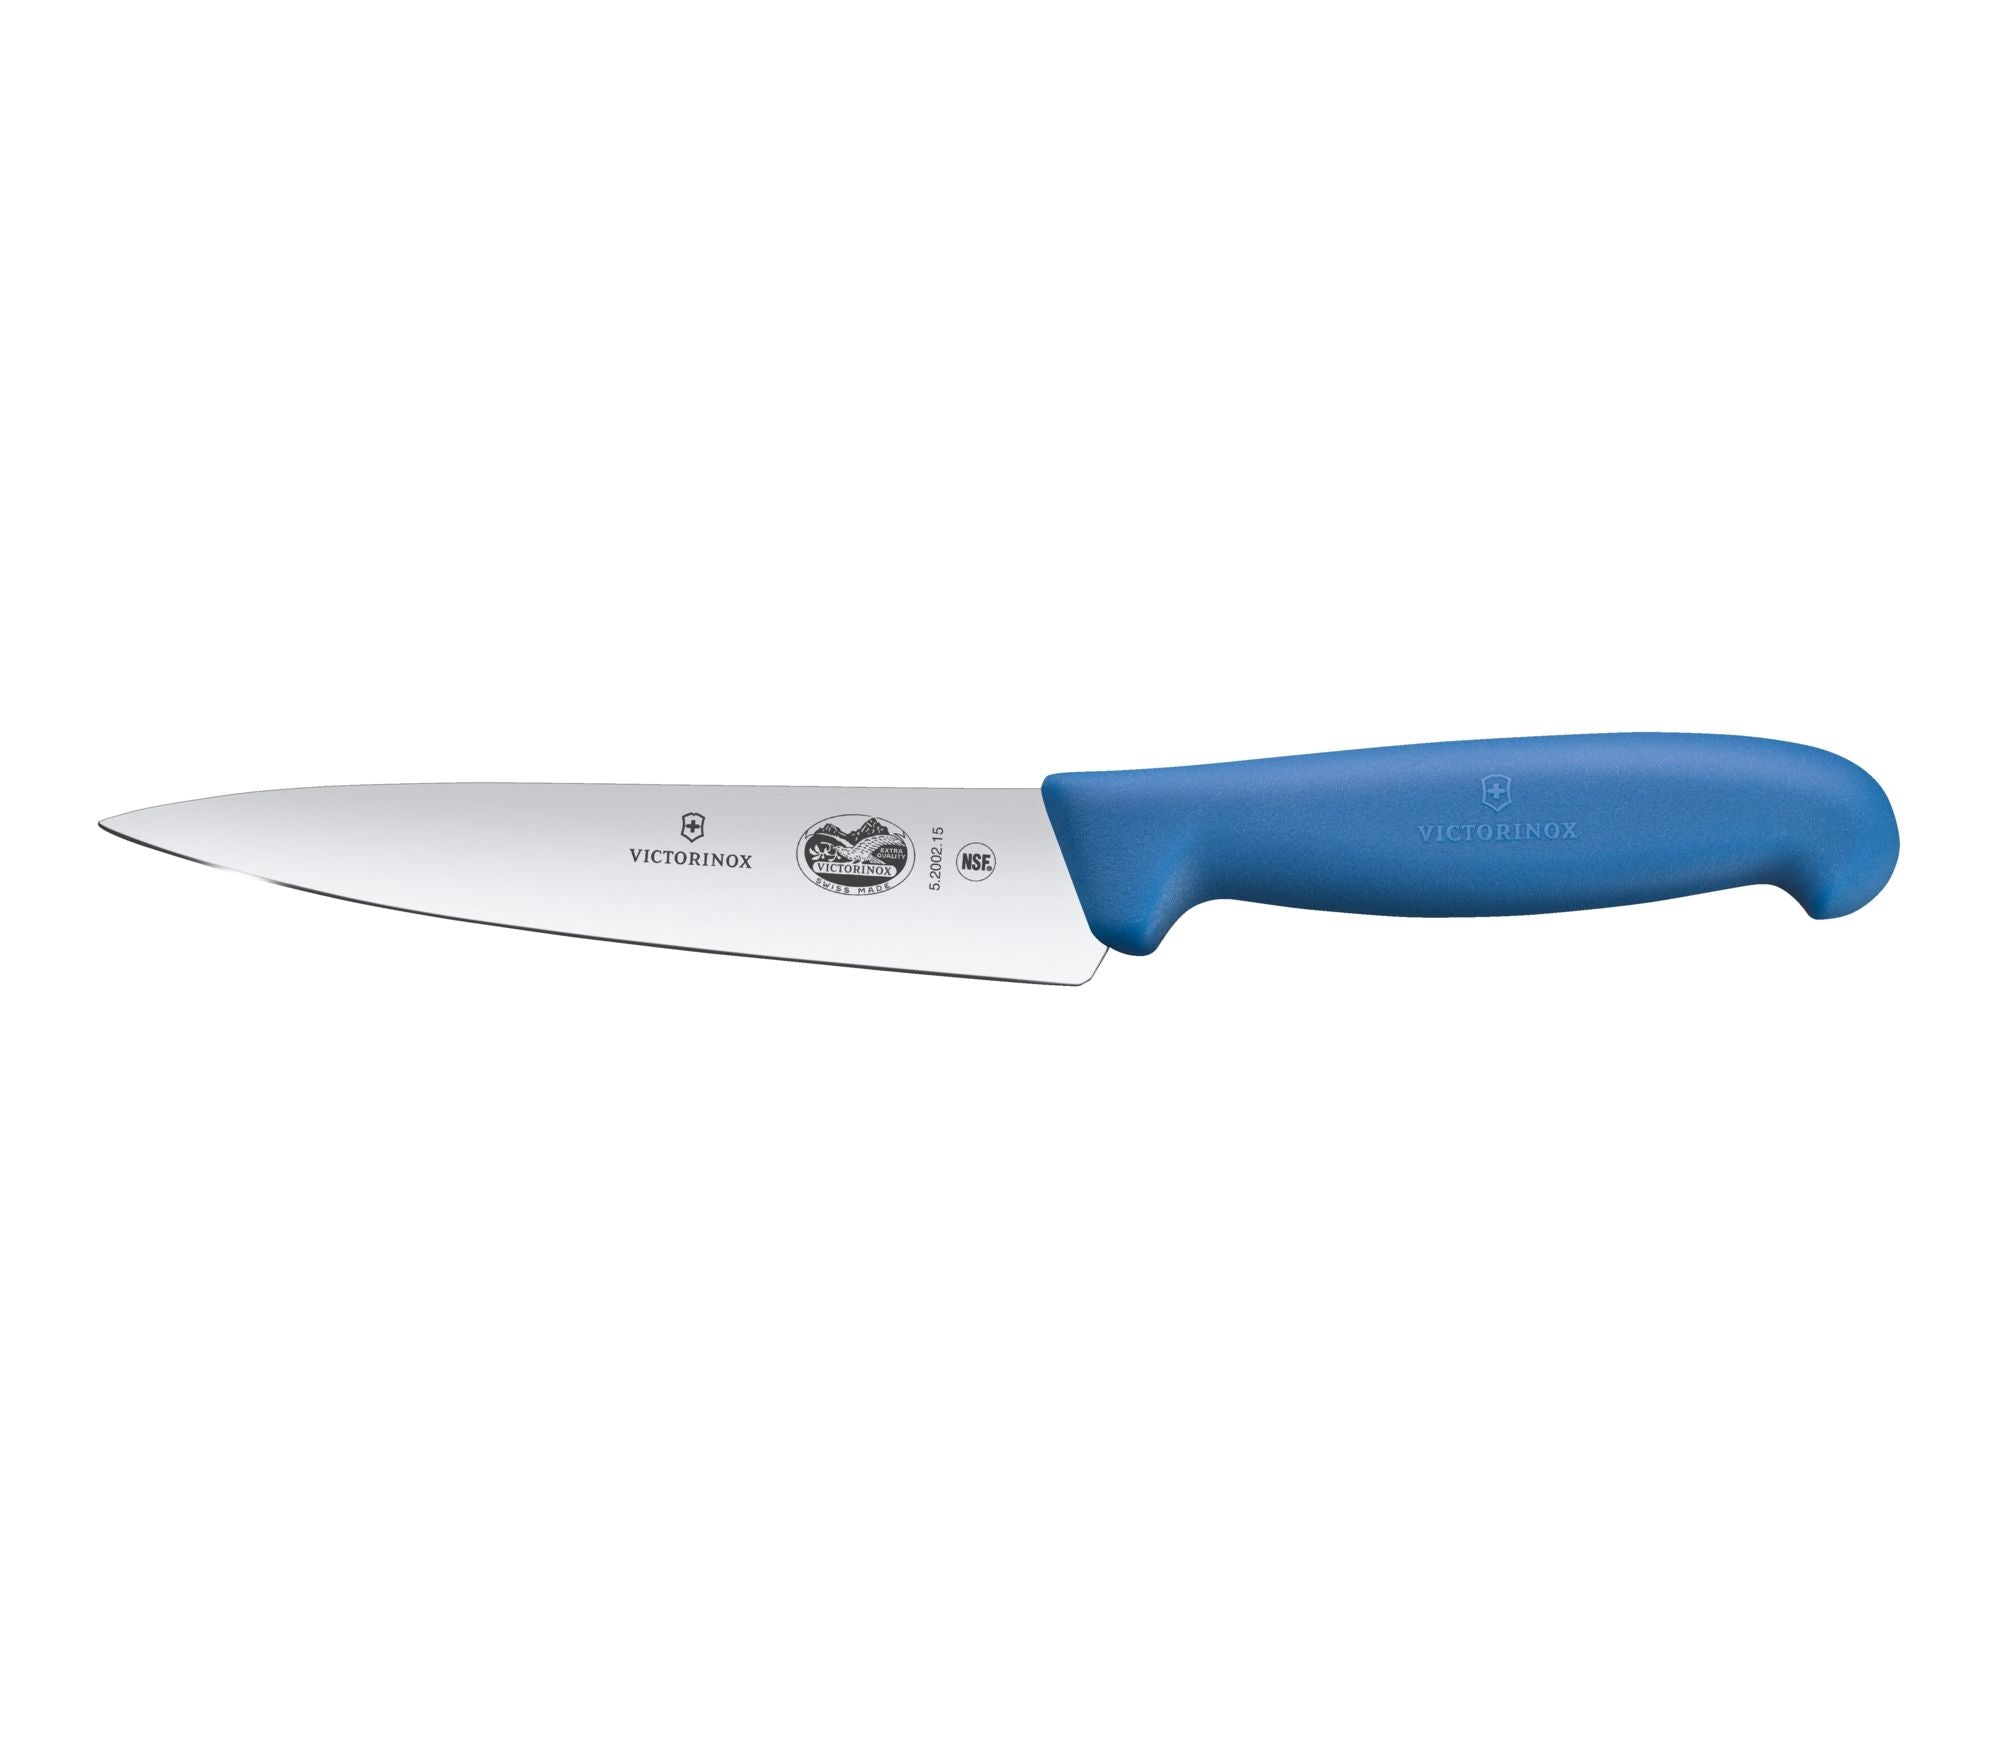 VICTORINOX KITCHEN & CARVING KNIFE FIBROX - BLUE - Mabrook Hotel Supplies